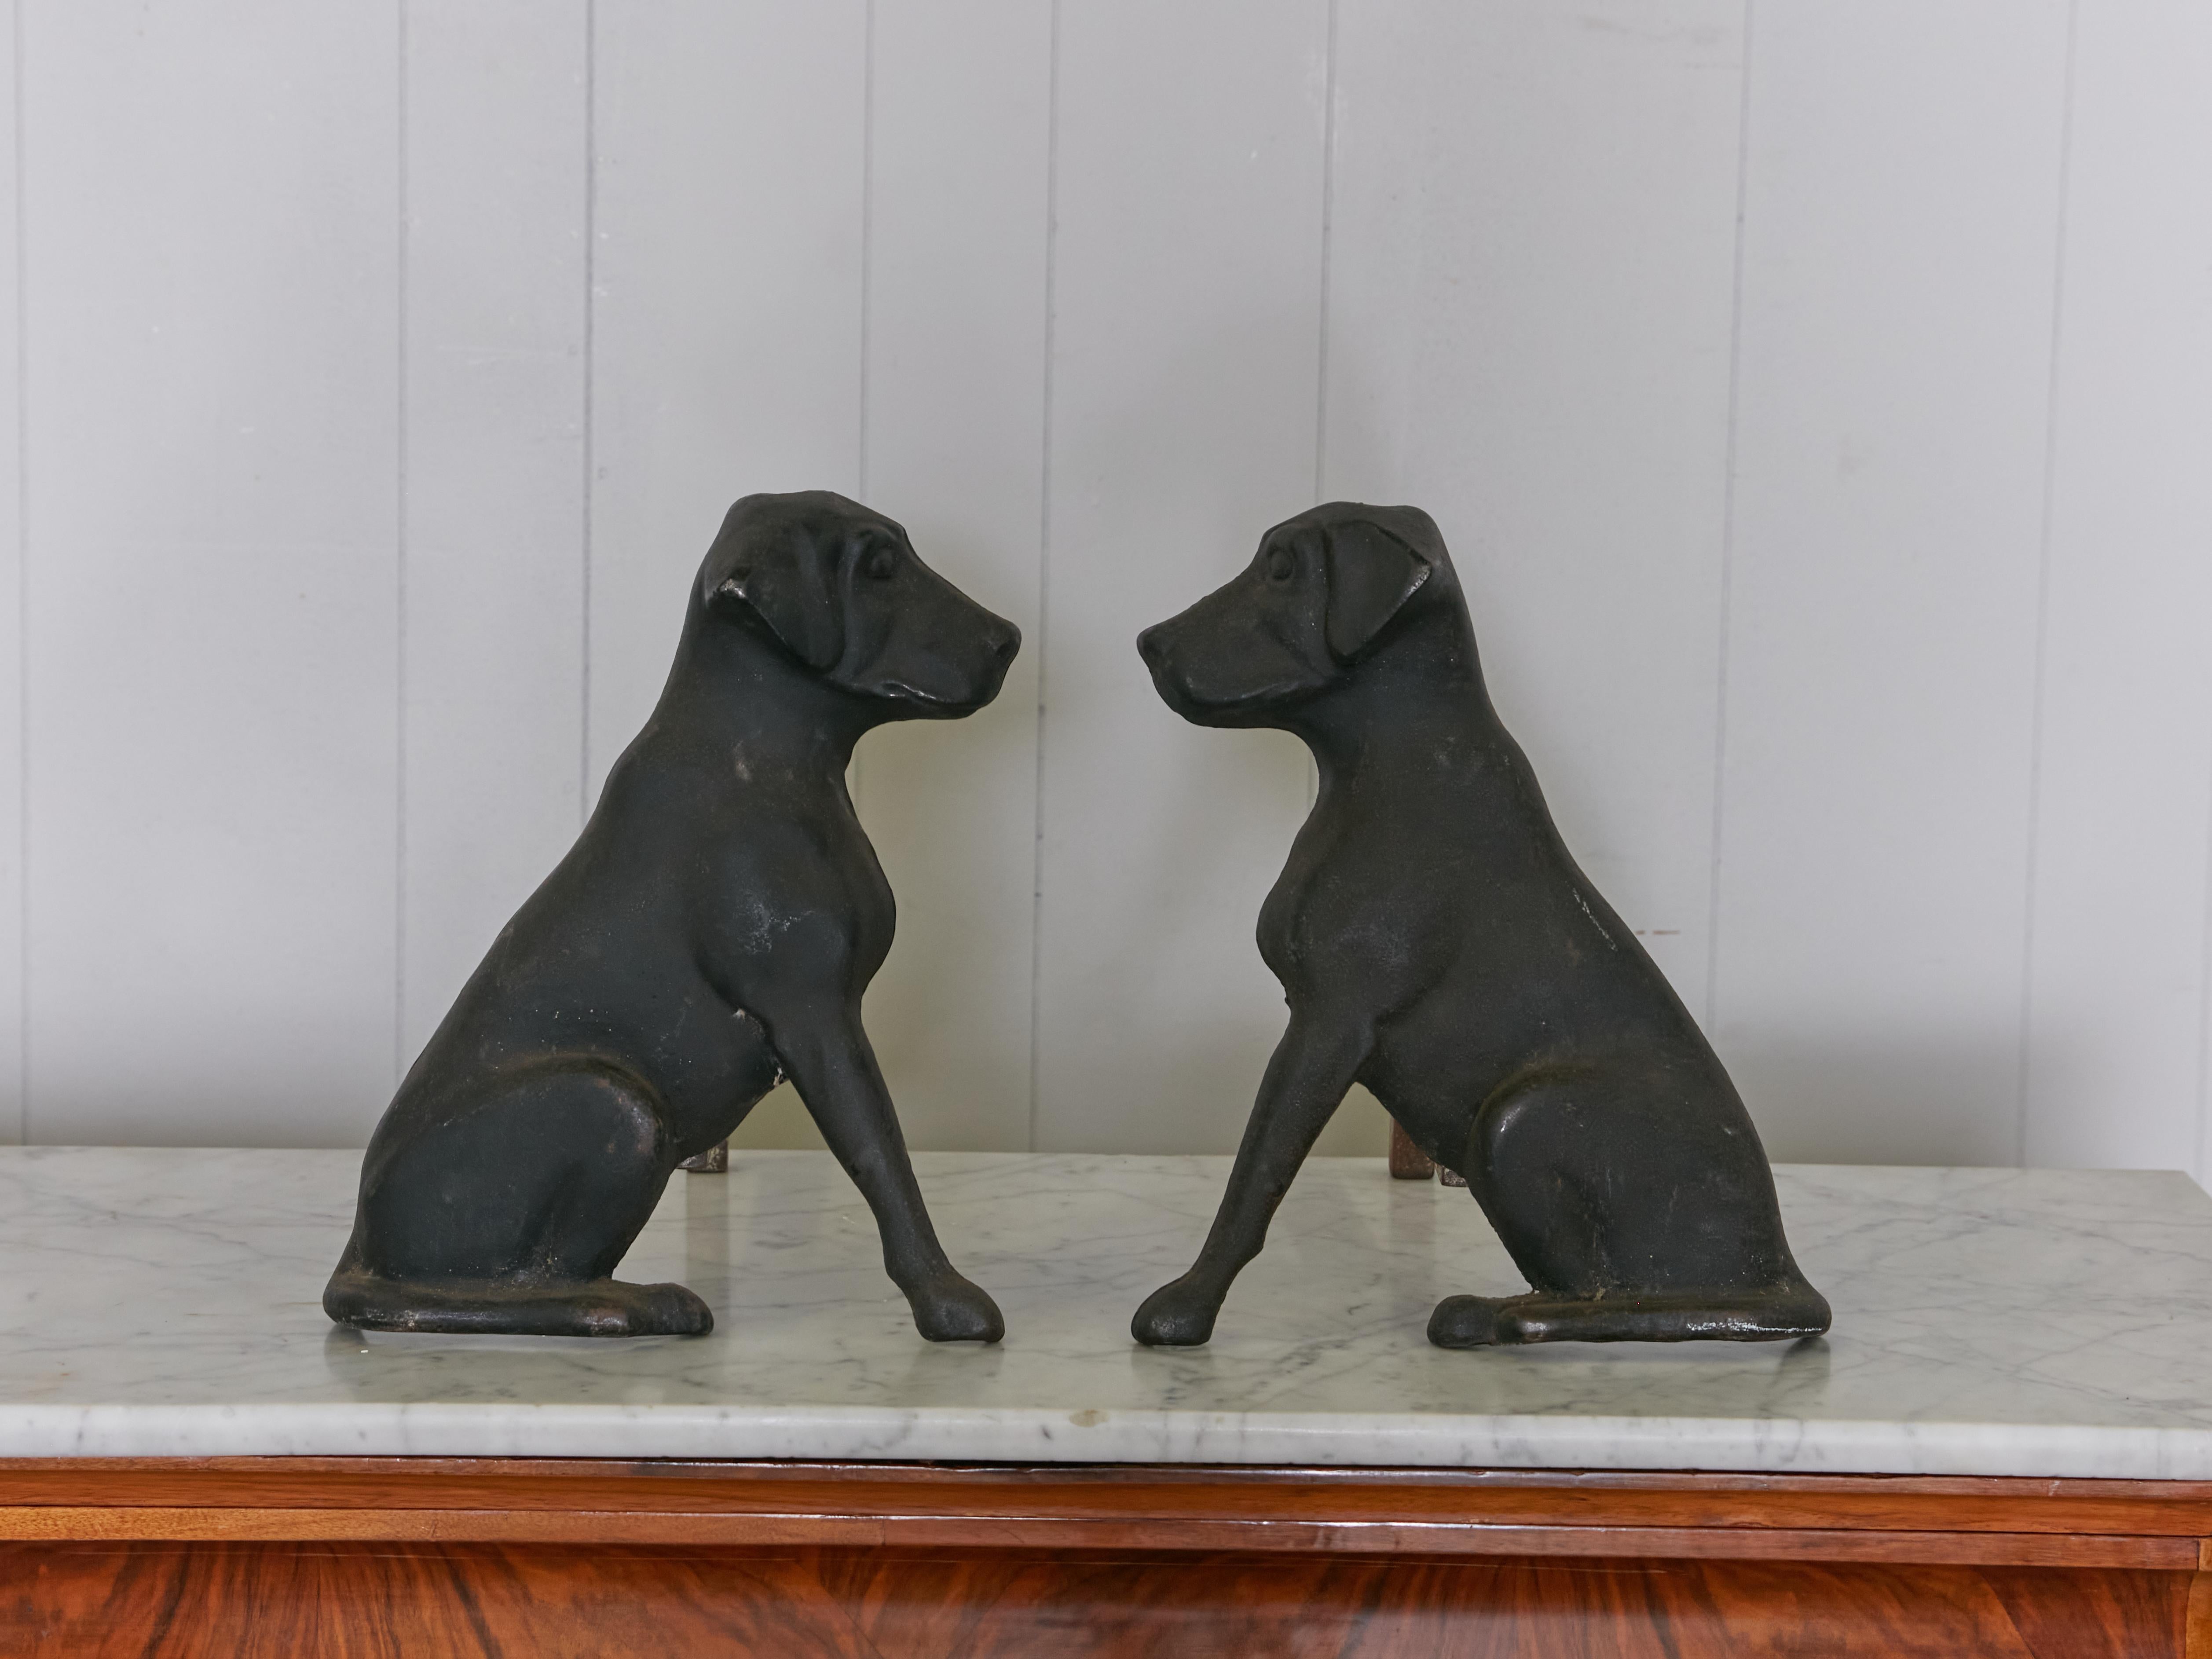 A pair of vintage American cast iron labrador dogs andirons from the mid 20th century, with black patina, stamped Liberty Foundry St Louis. Made in Saint Louis, MO during the Midcentury period, this pair of cast iron andirons comes from the Liberty